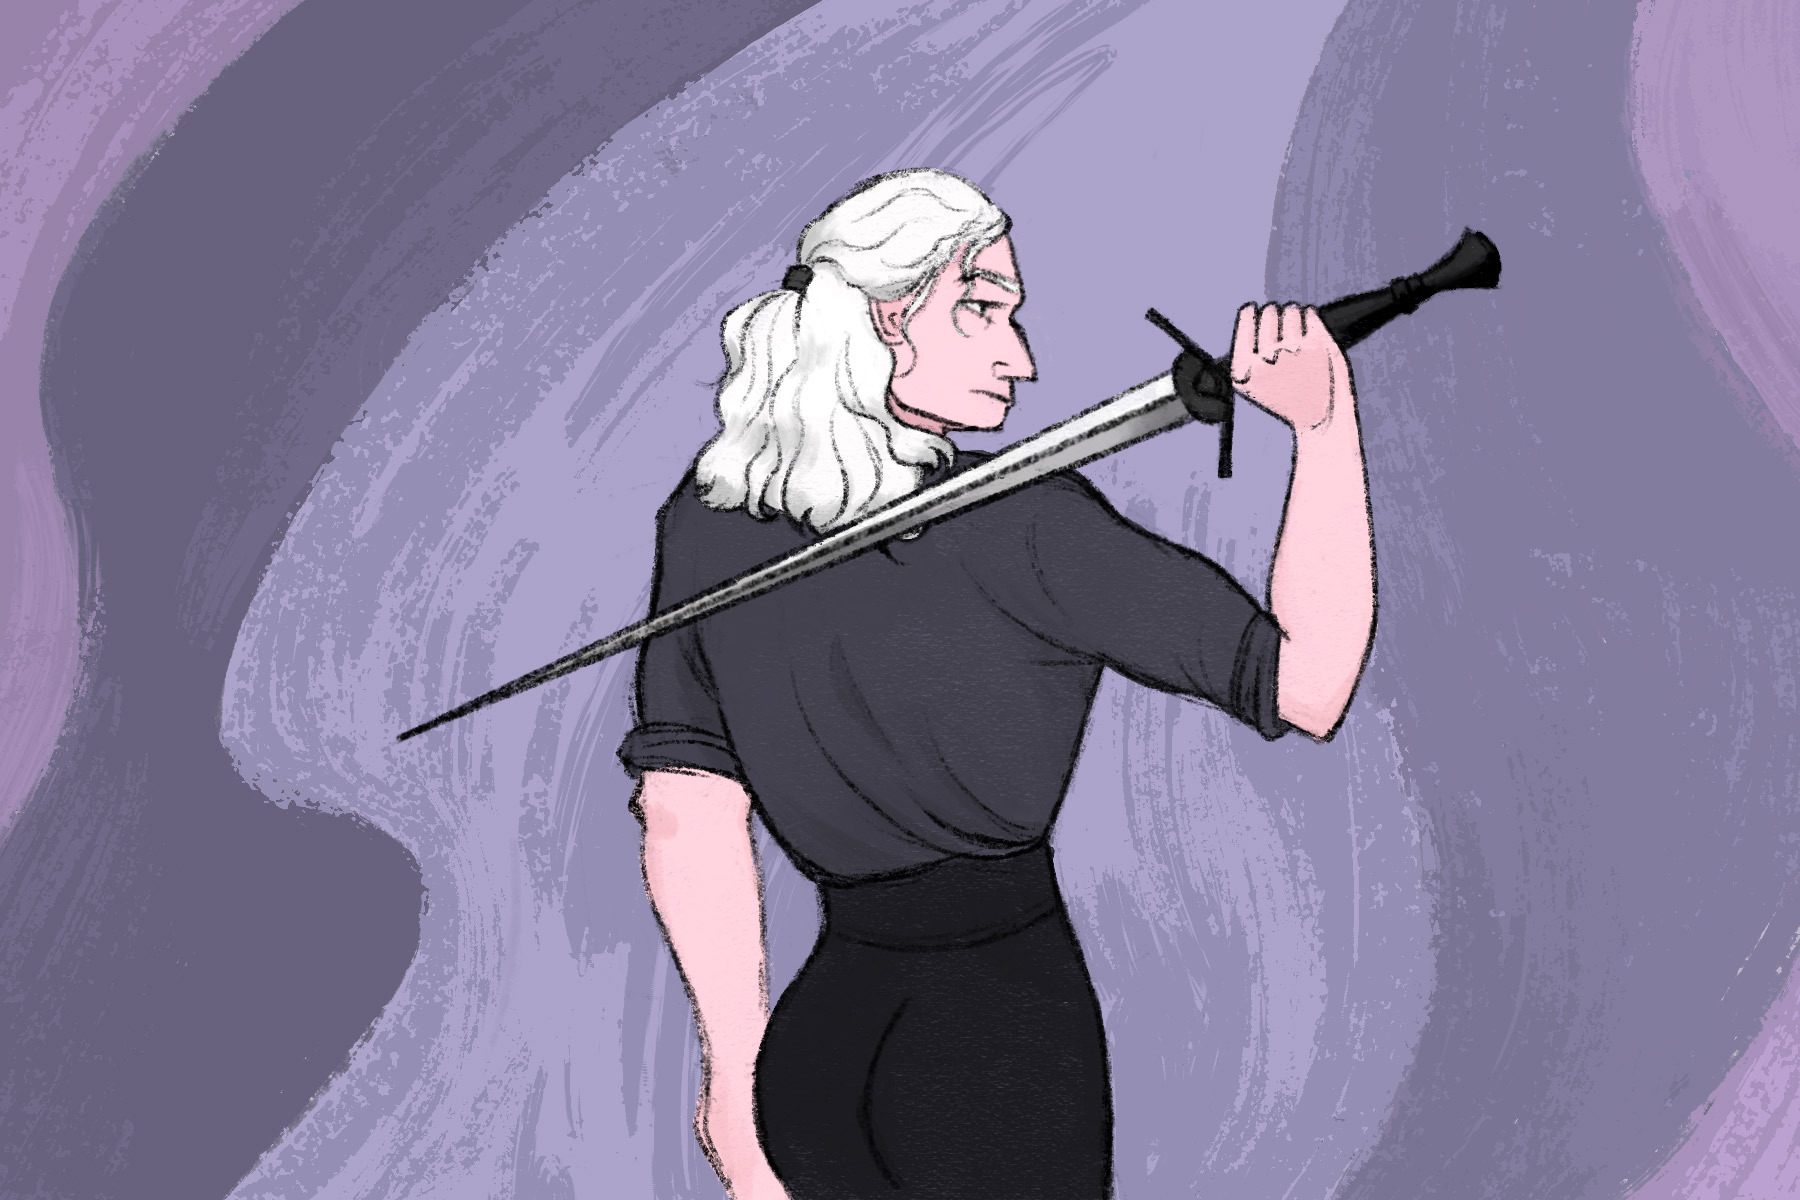 Geralt from The Witcher with a sword